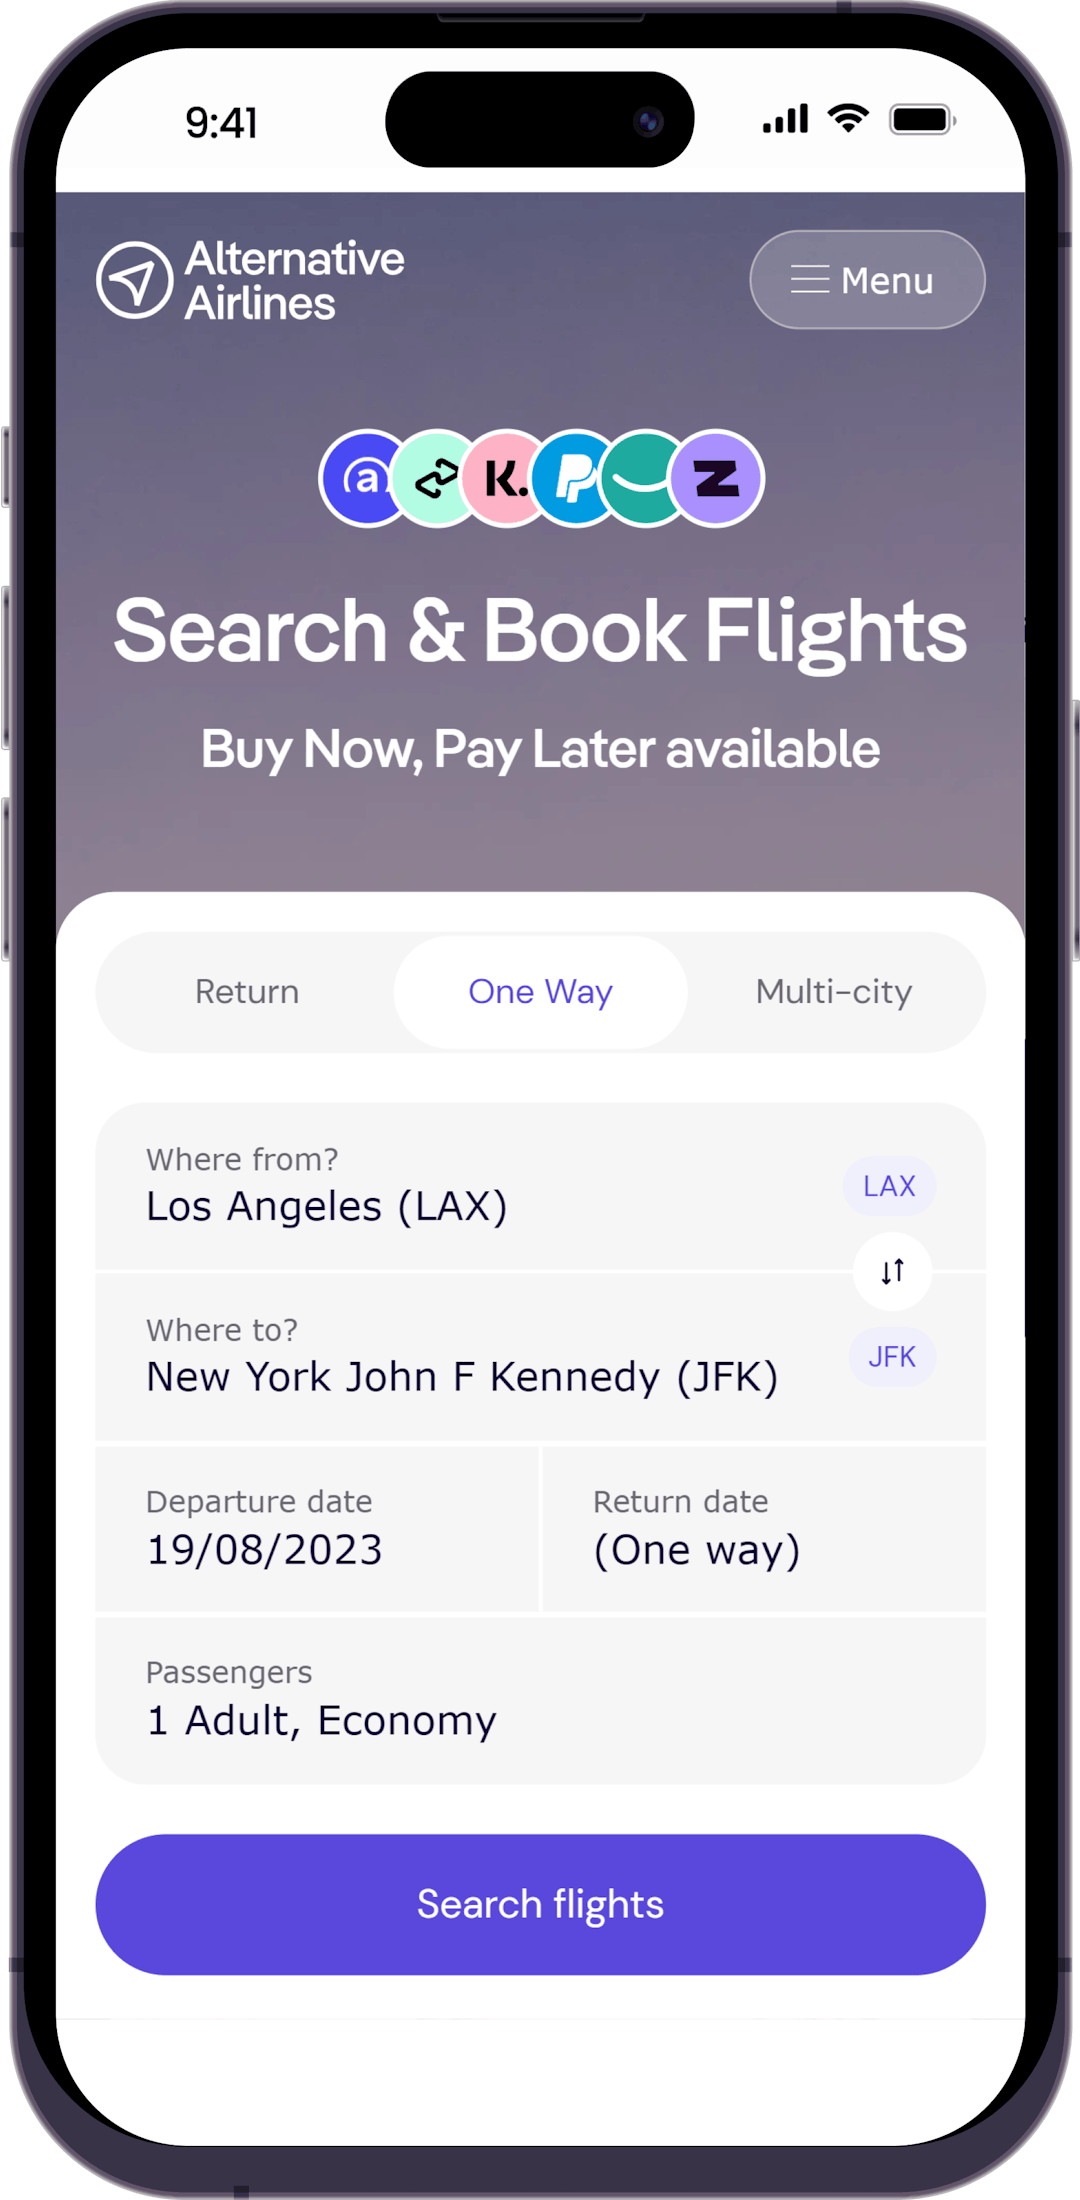 Step 1 - Search for last-minute flight